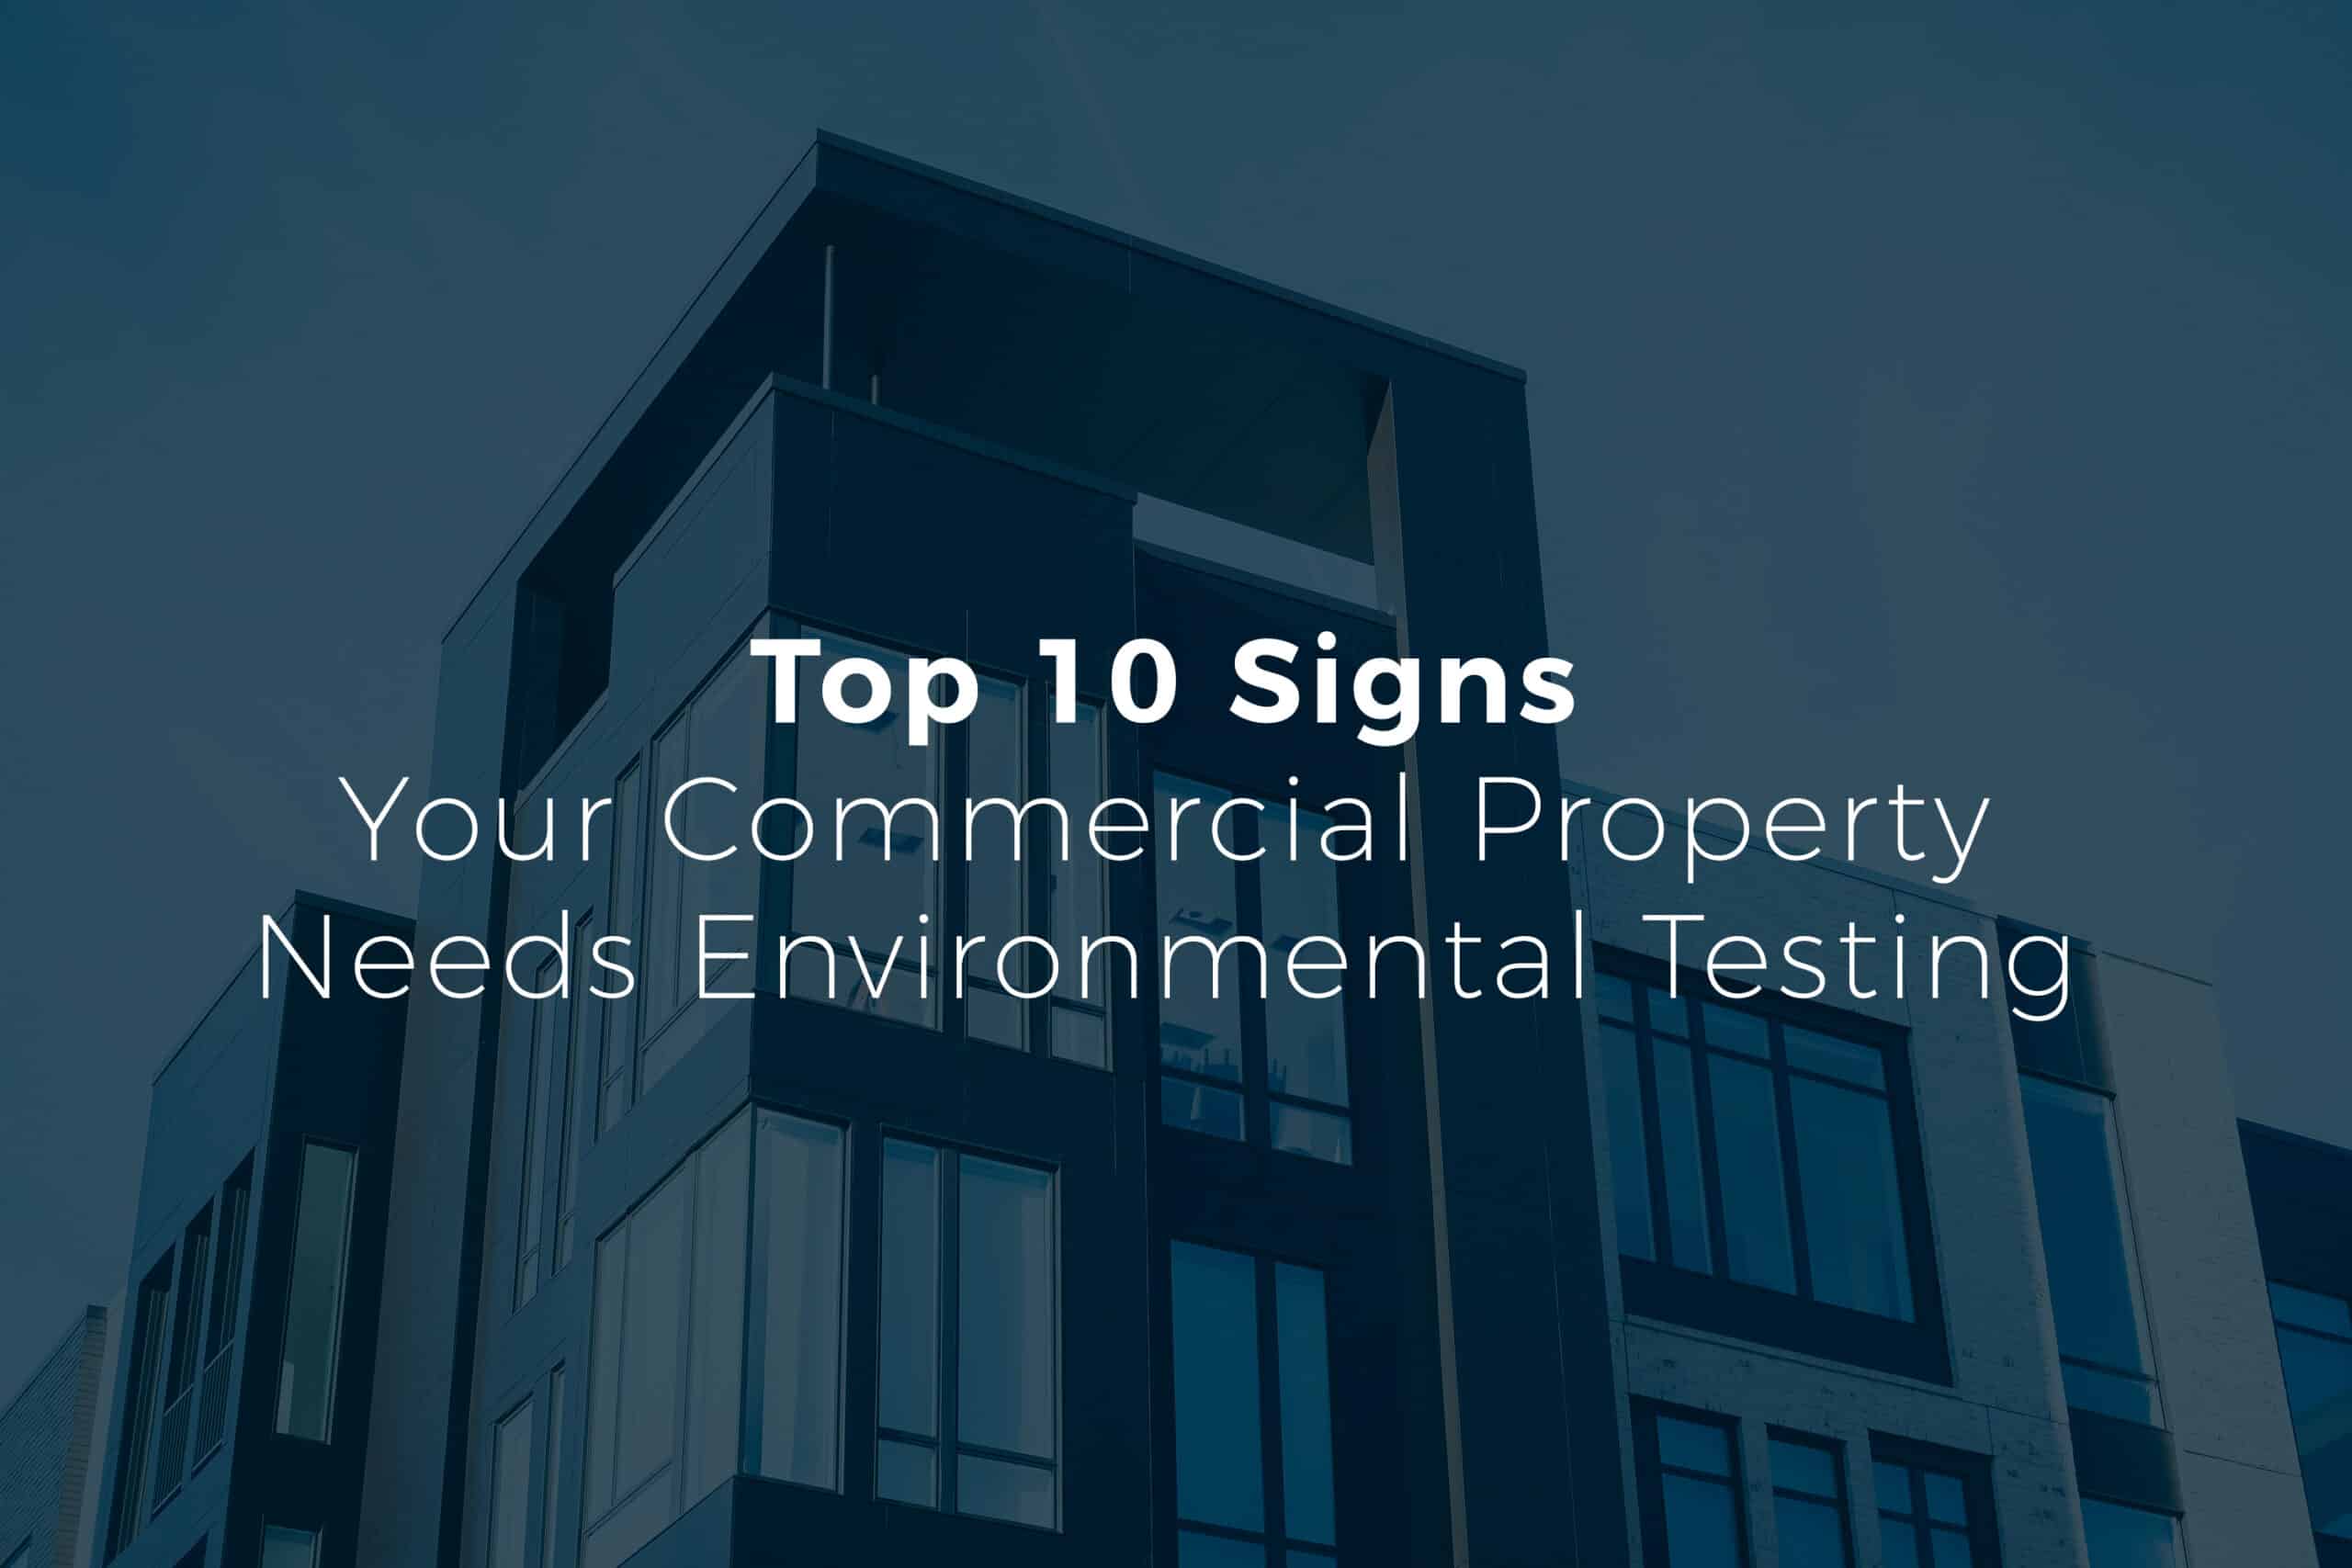 Top 10 Signs Your Commercial Property Needs Environmental Testing